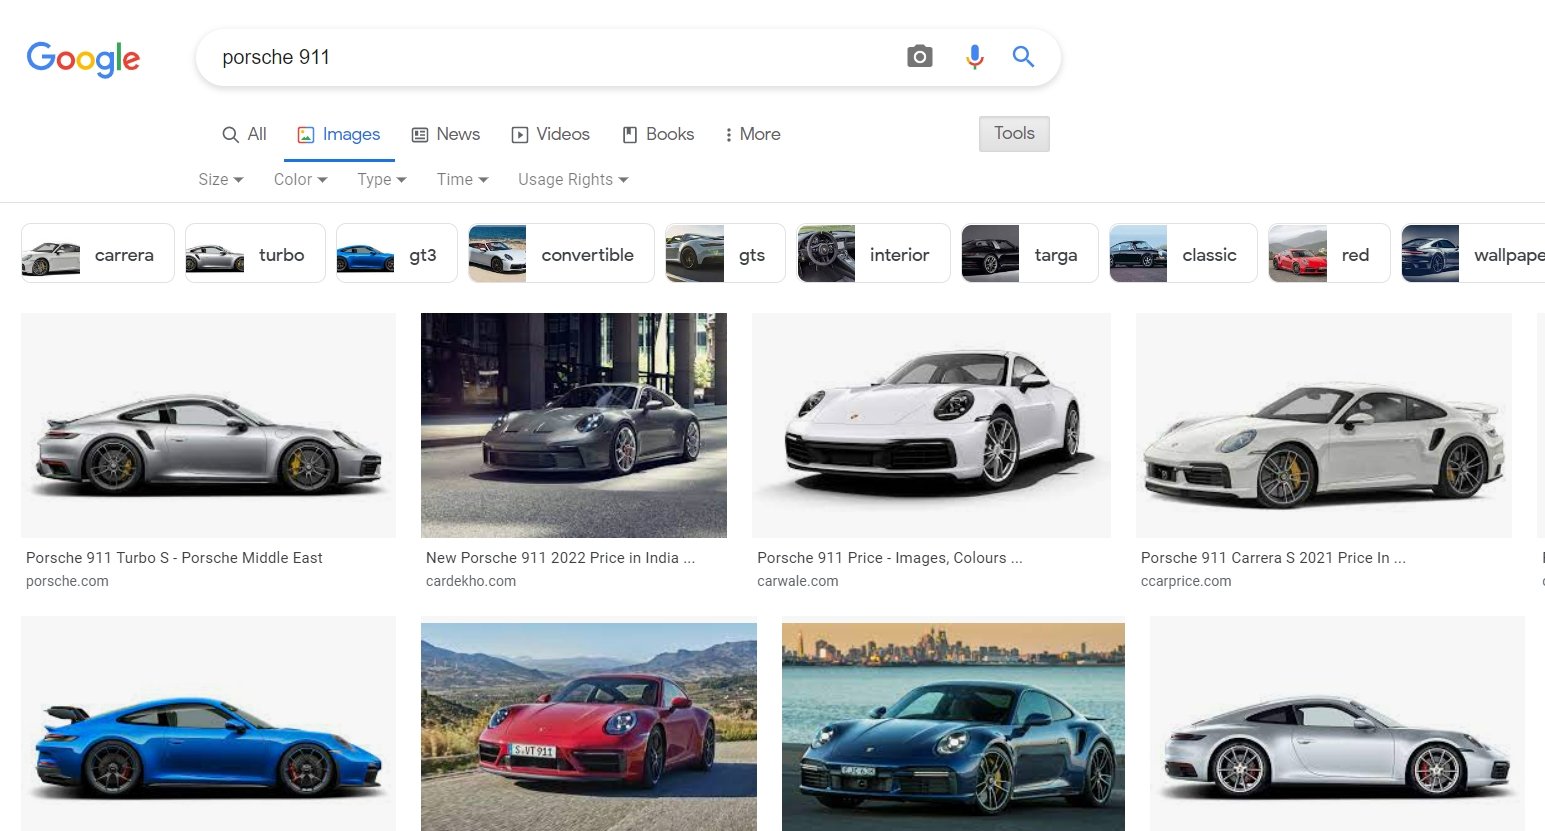 Google Image Search Filter